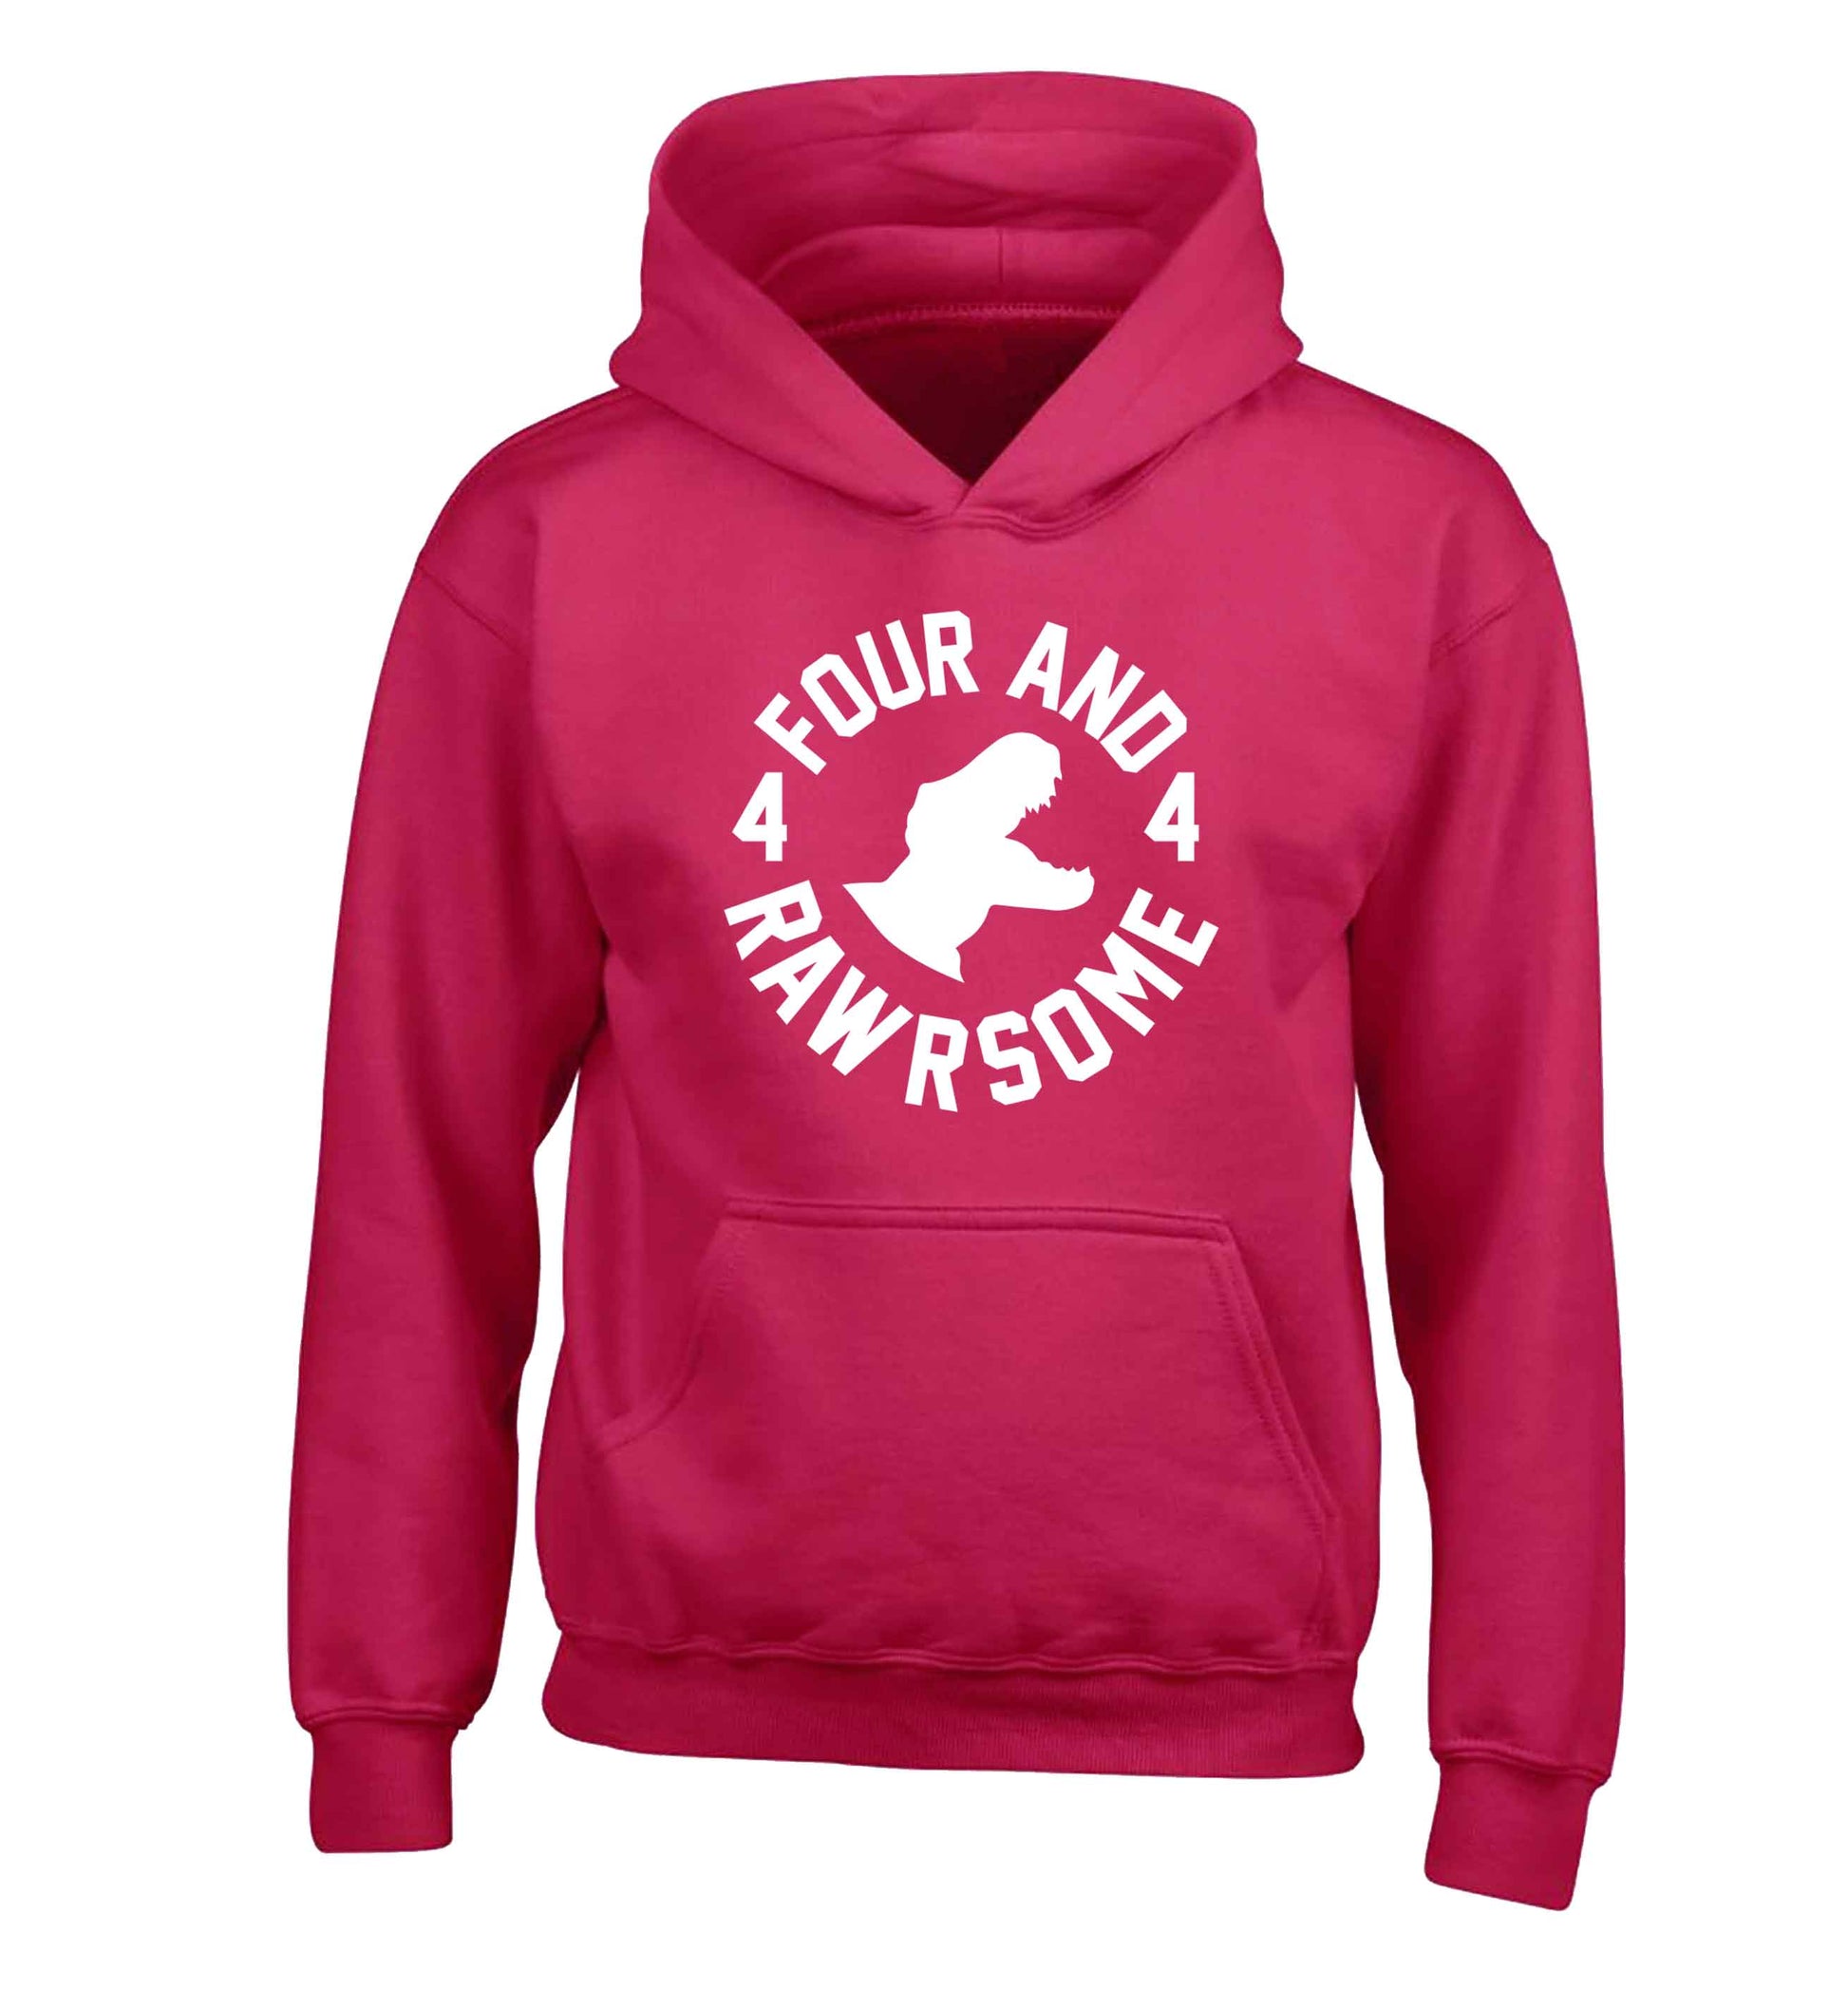 Four and rawrsome children's pink hoodie 12-13 Years